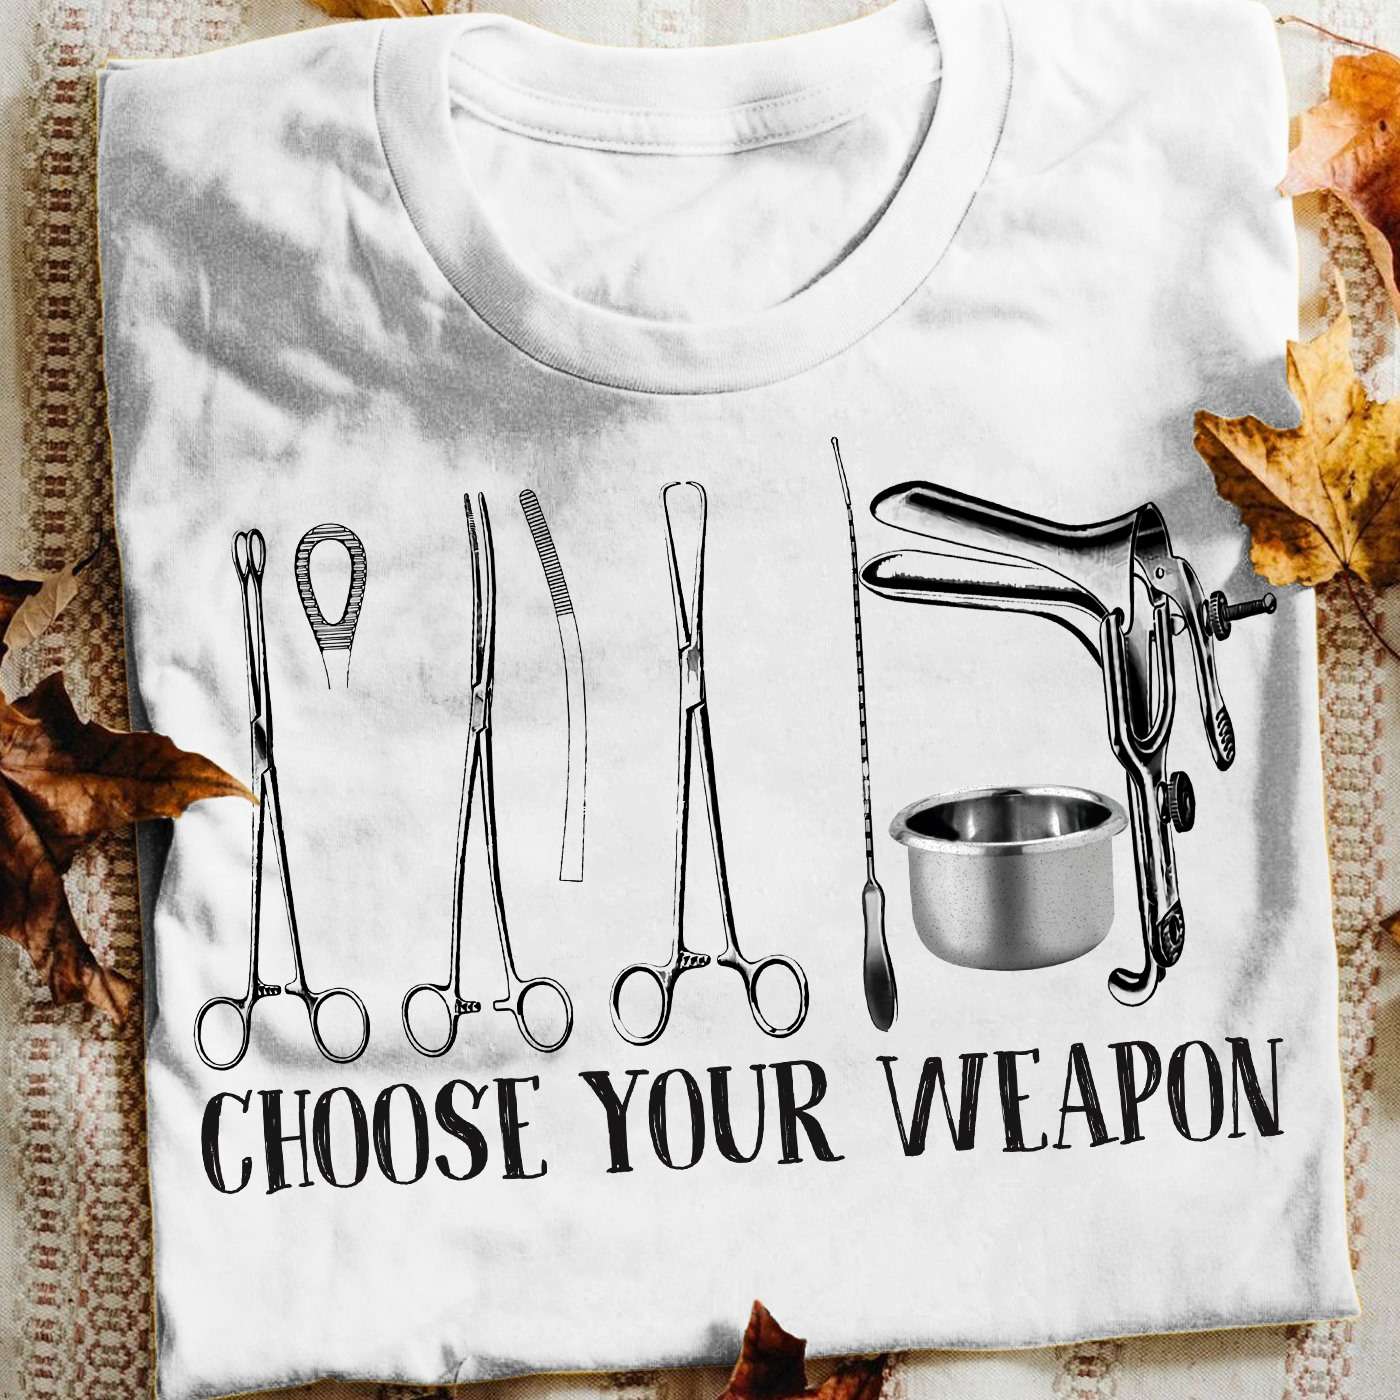 Abortion Device - Choose your weapon